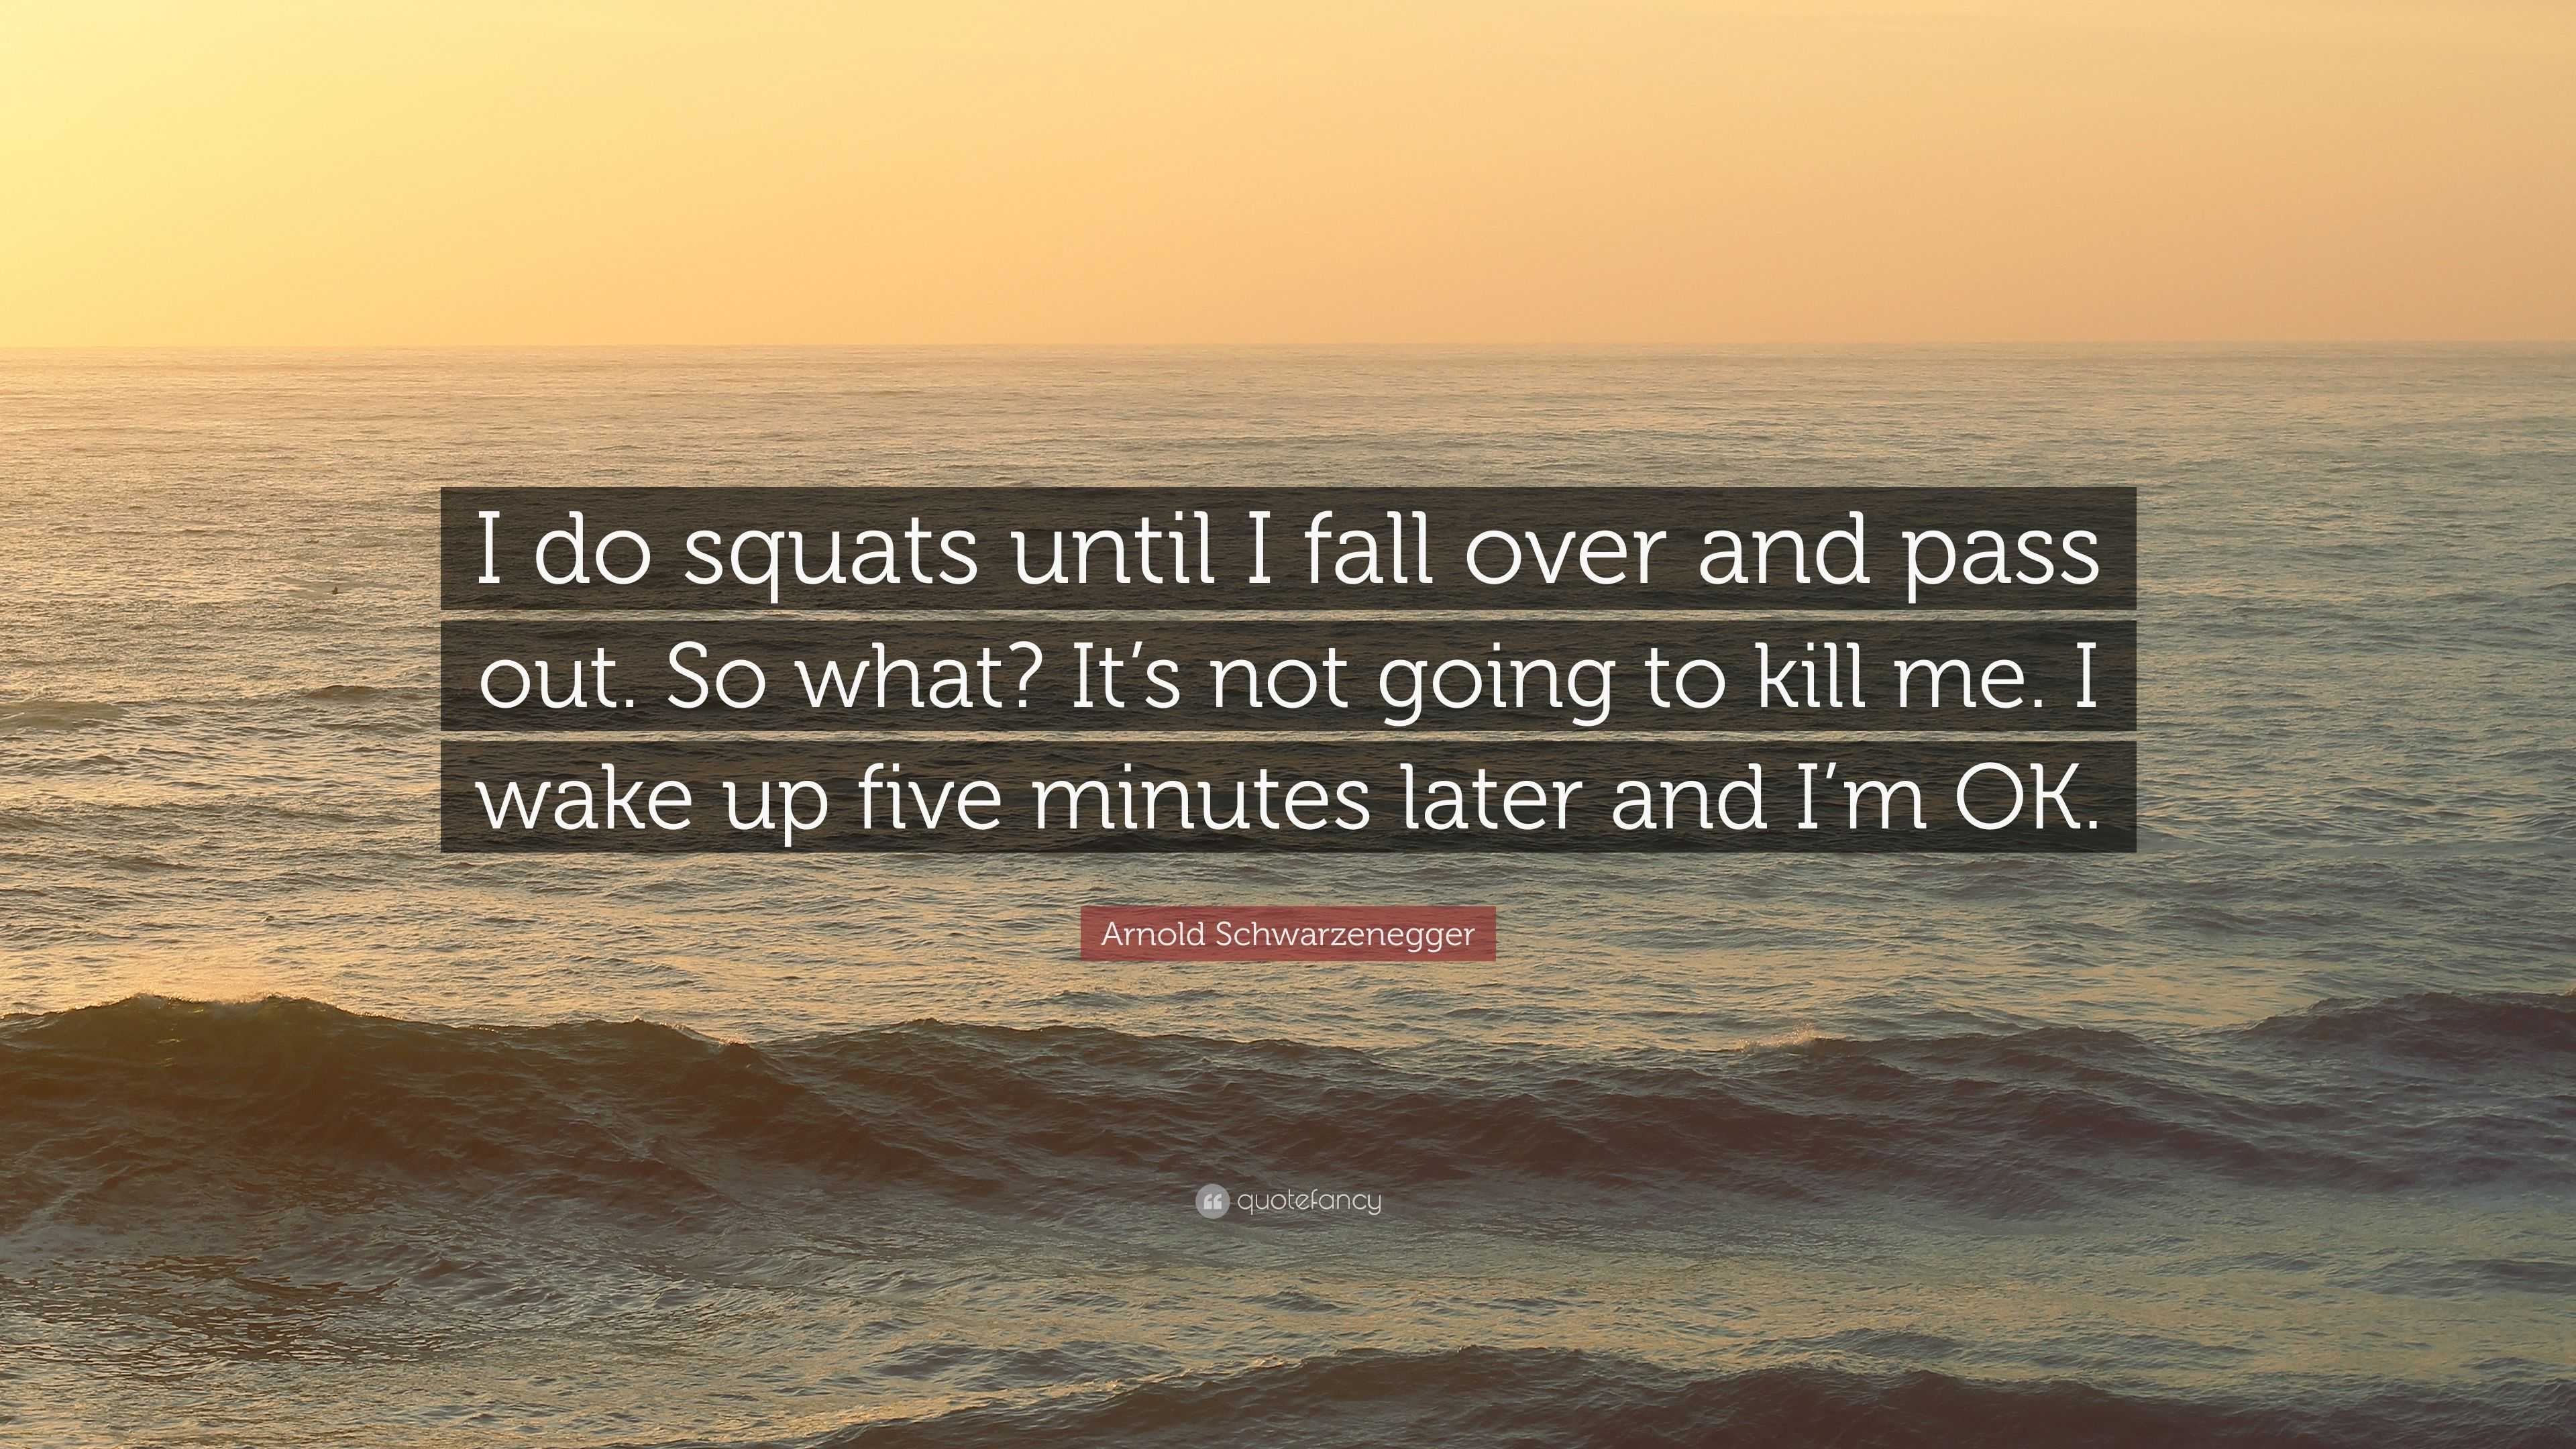 Arnold Schwarzenegger Quote: “I do squats until I fall over and